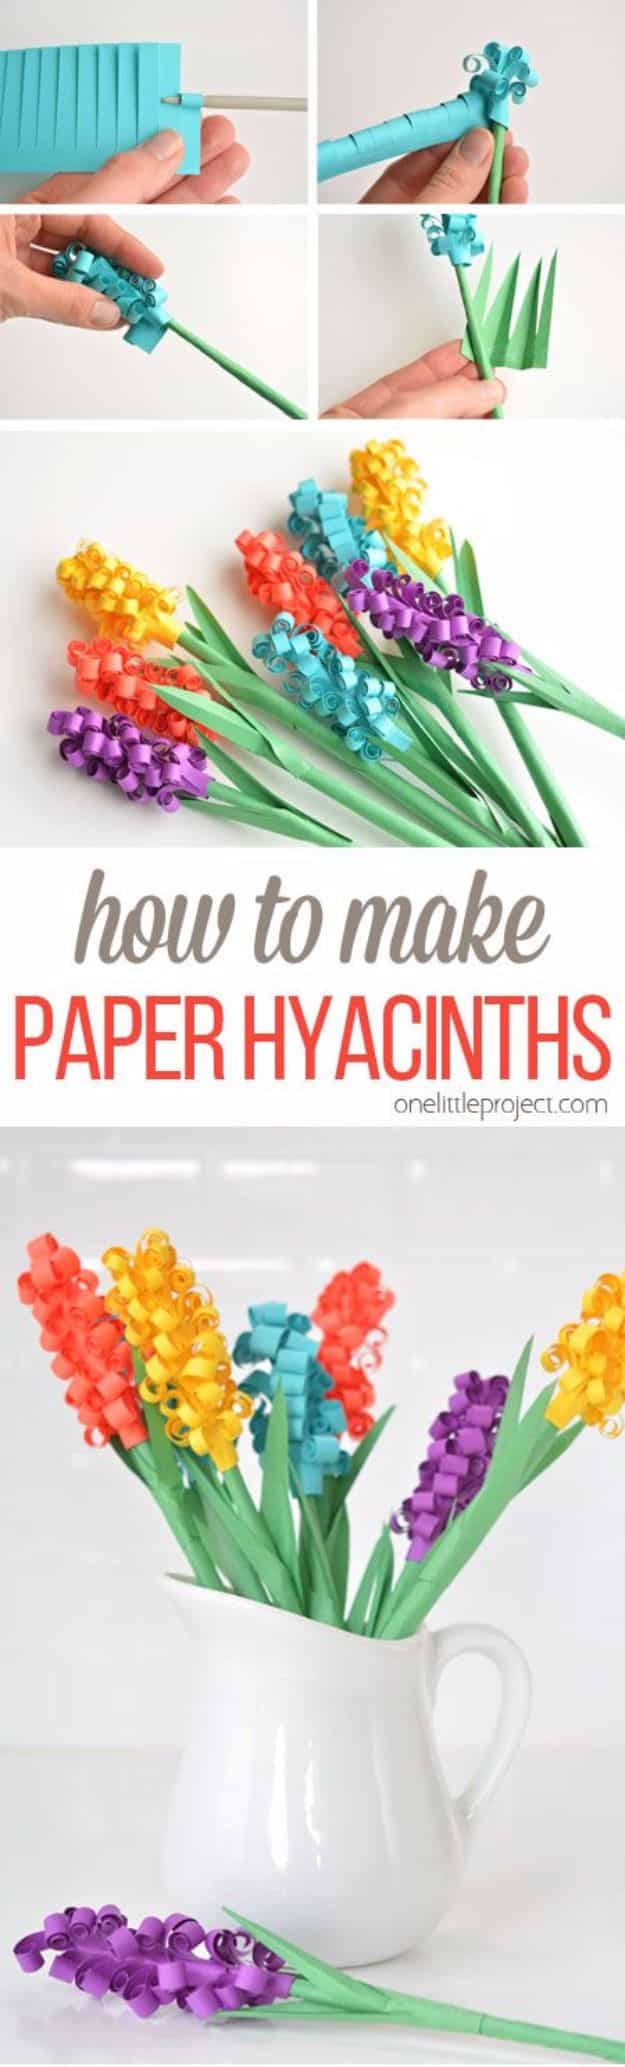 DIY Paper Flowers - Paper Hyacinth Flowers - How To Make A Paper Flower - Large Wedding Backdrop for Wall Decor - Easy Tissue Paper Flower Tutorial for Kids - Giant Projects for Photo Backdrops - Daisy, Roses, Bouquets, Centerpieces - Cricut Template and Step by Step Tutorial 